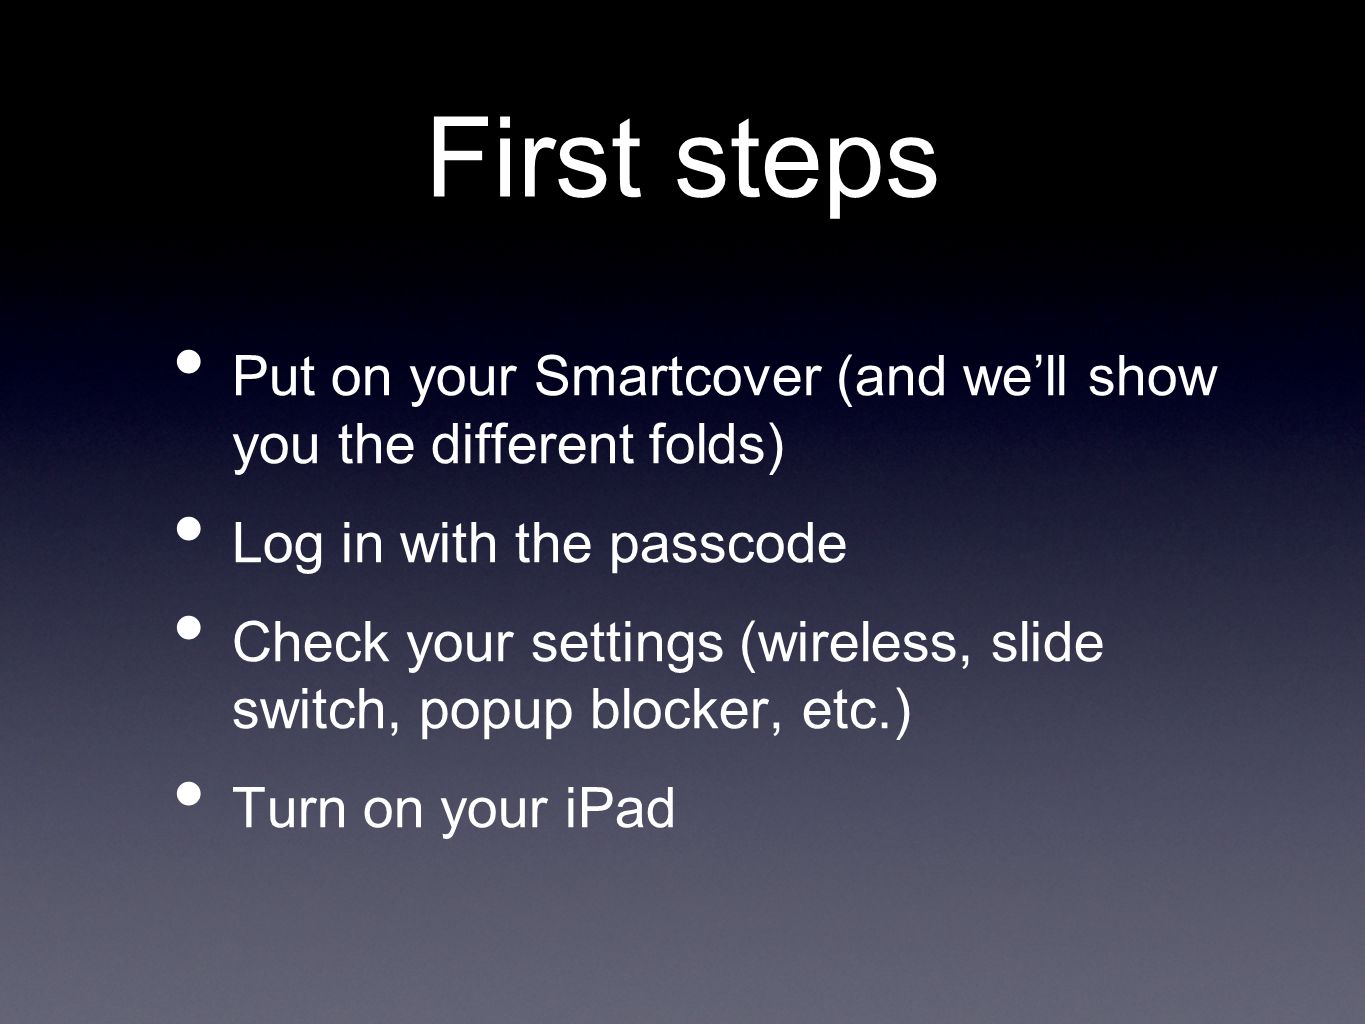 First steps Put on your Smartcover (and we’ll show you the different folds) Log in with the passcode Check your settings (wireless, slide switch, popup blocker, etc.) Turn on your iPad